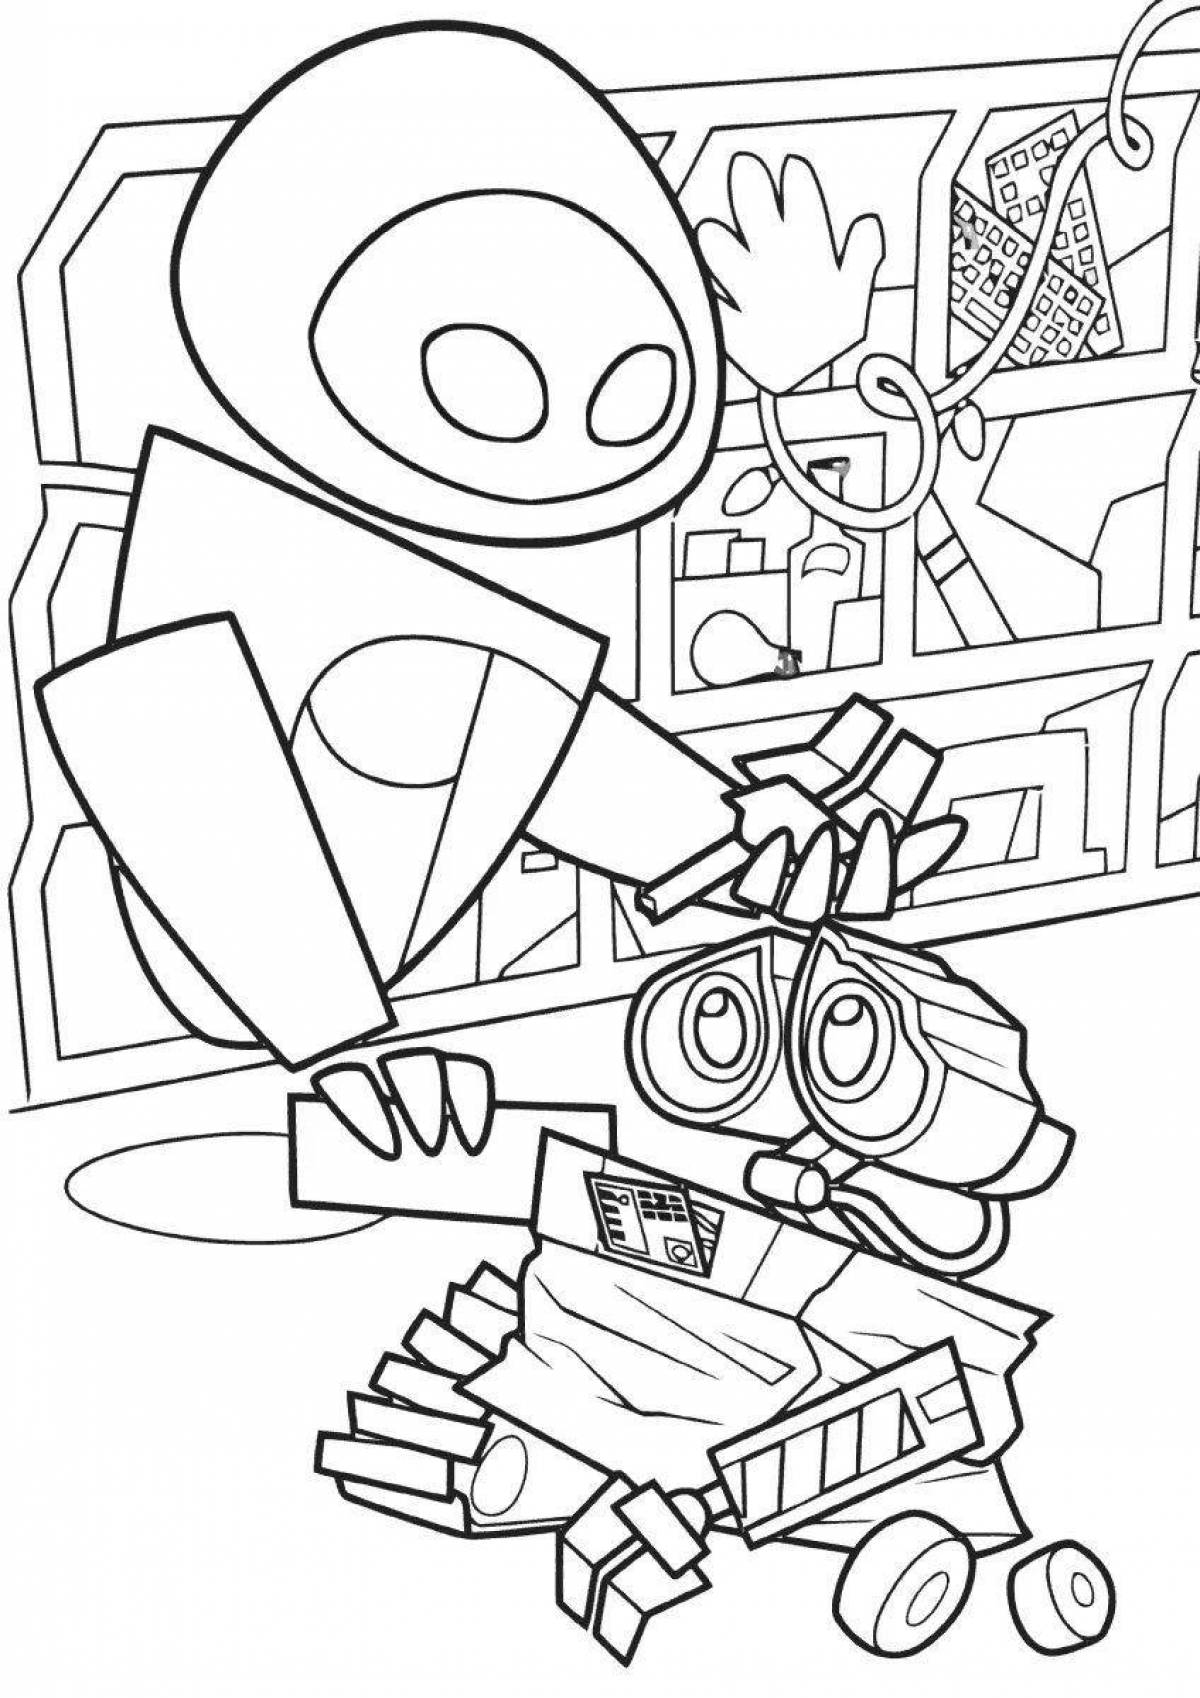 Joyful valley carnival coloring page